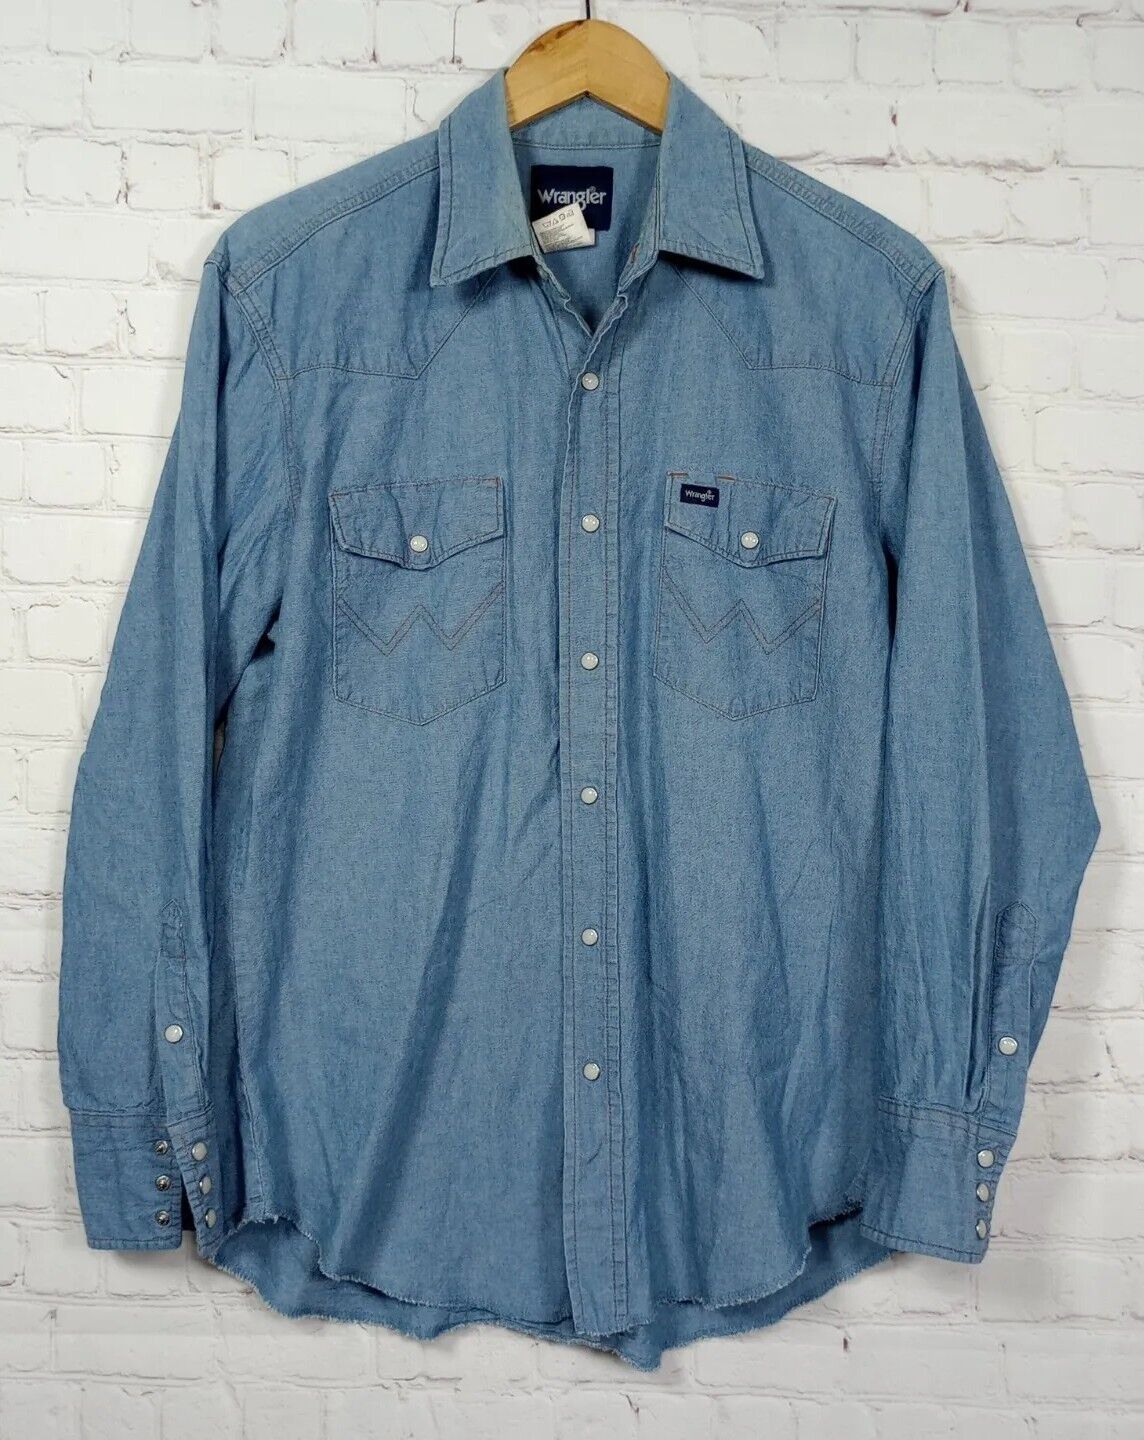 Vintage Wrangler Western Denim Shirt with Pearl Snaps MS709CH Men\'s Size Large 